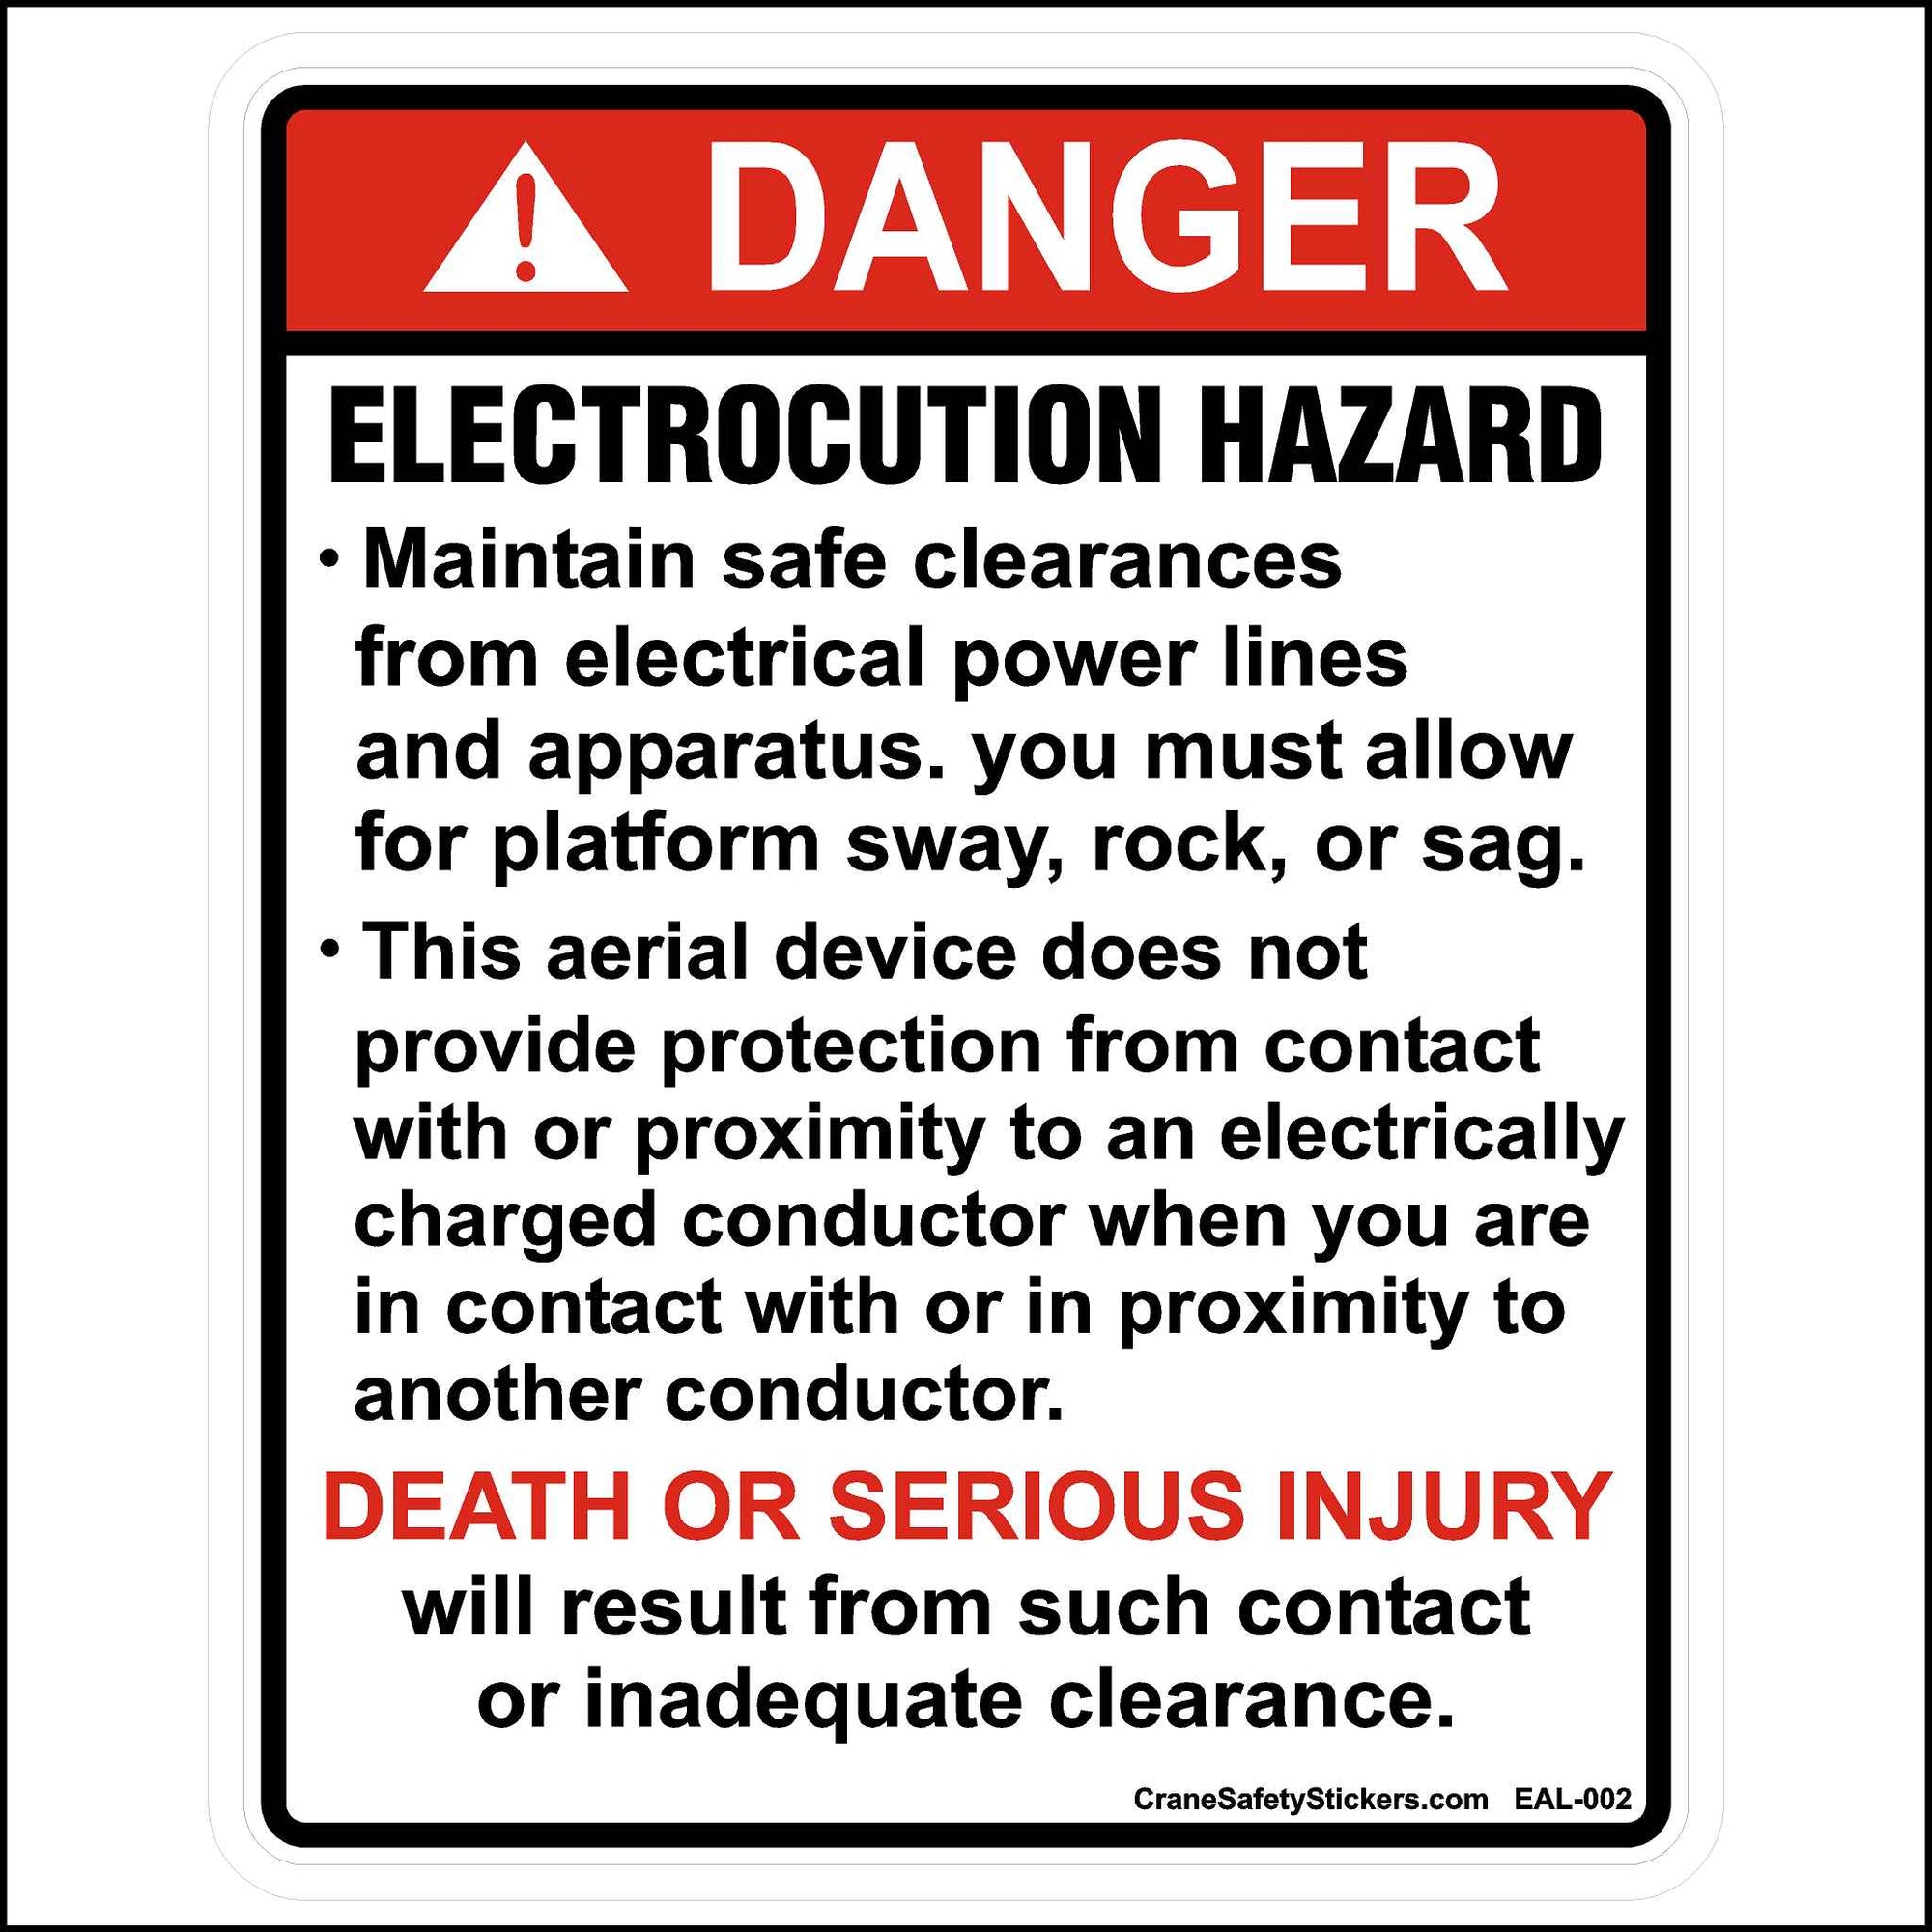 Aerial Lift Safety Sticker Printed with.  DANGER Electrocution Hazard,  • Maintain safe clearances from electrical power lines and apparatus. you must allow for platform sway, rock, or sag.  • This aerial device does not provide protection from contact with or proximity to an electrically charged conductor when you are in contact with or in proximity to another conductor.  DEATH OR SERIOUS INJURY will result from such contact or inadequate clearance.